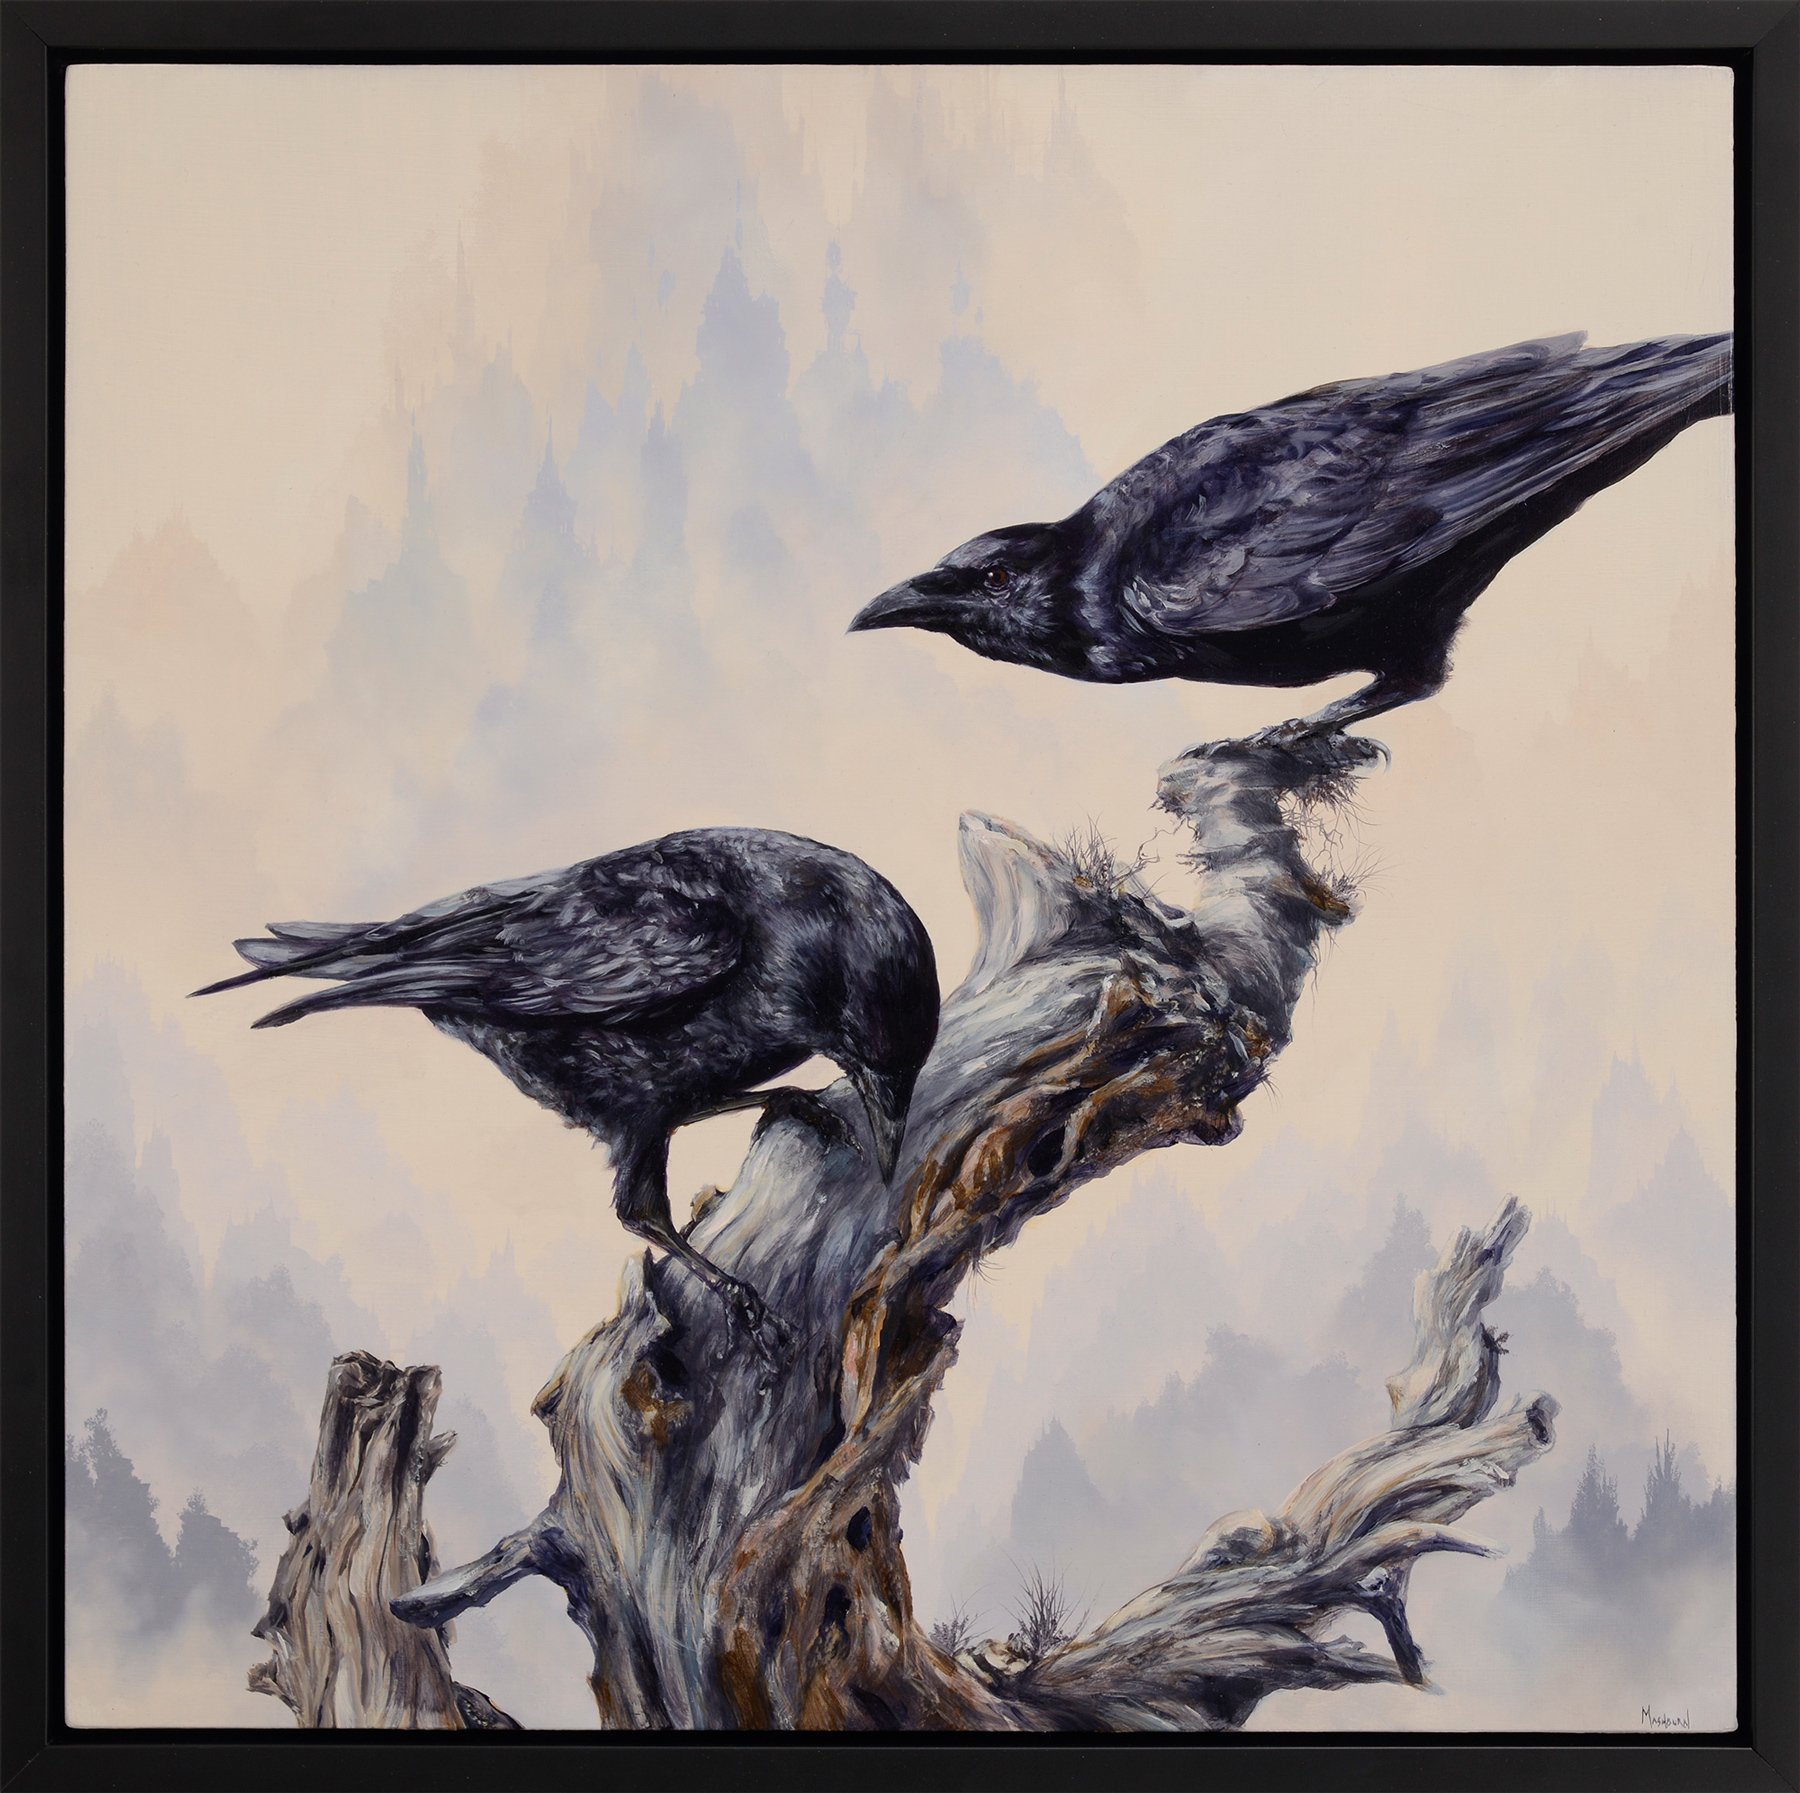 Driftwood with Crows